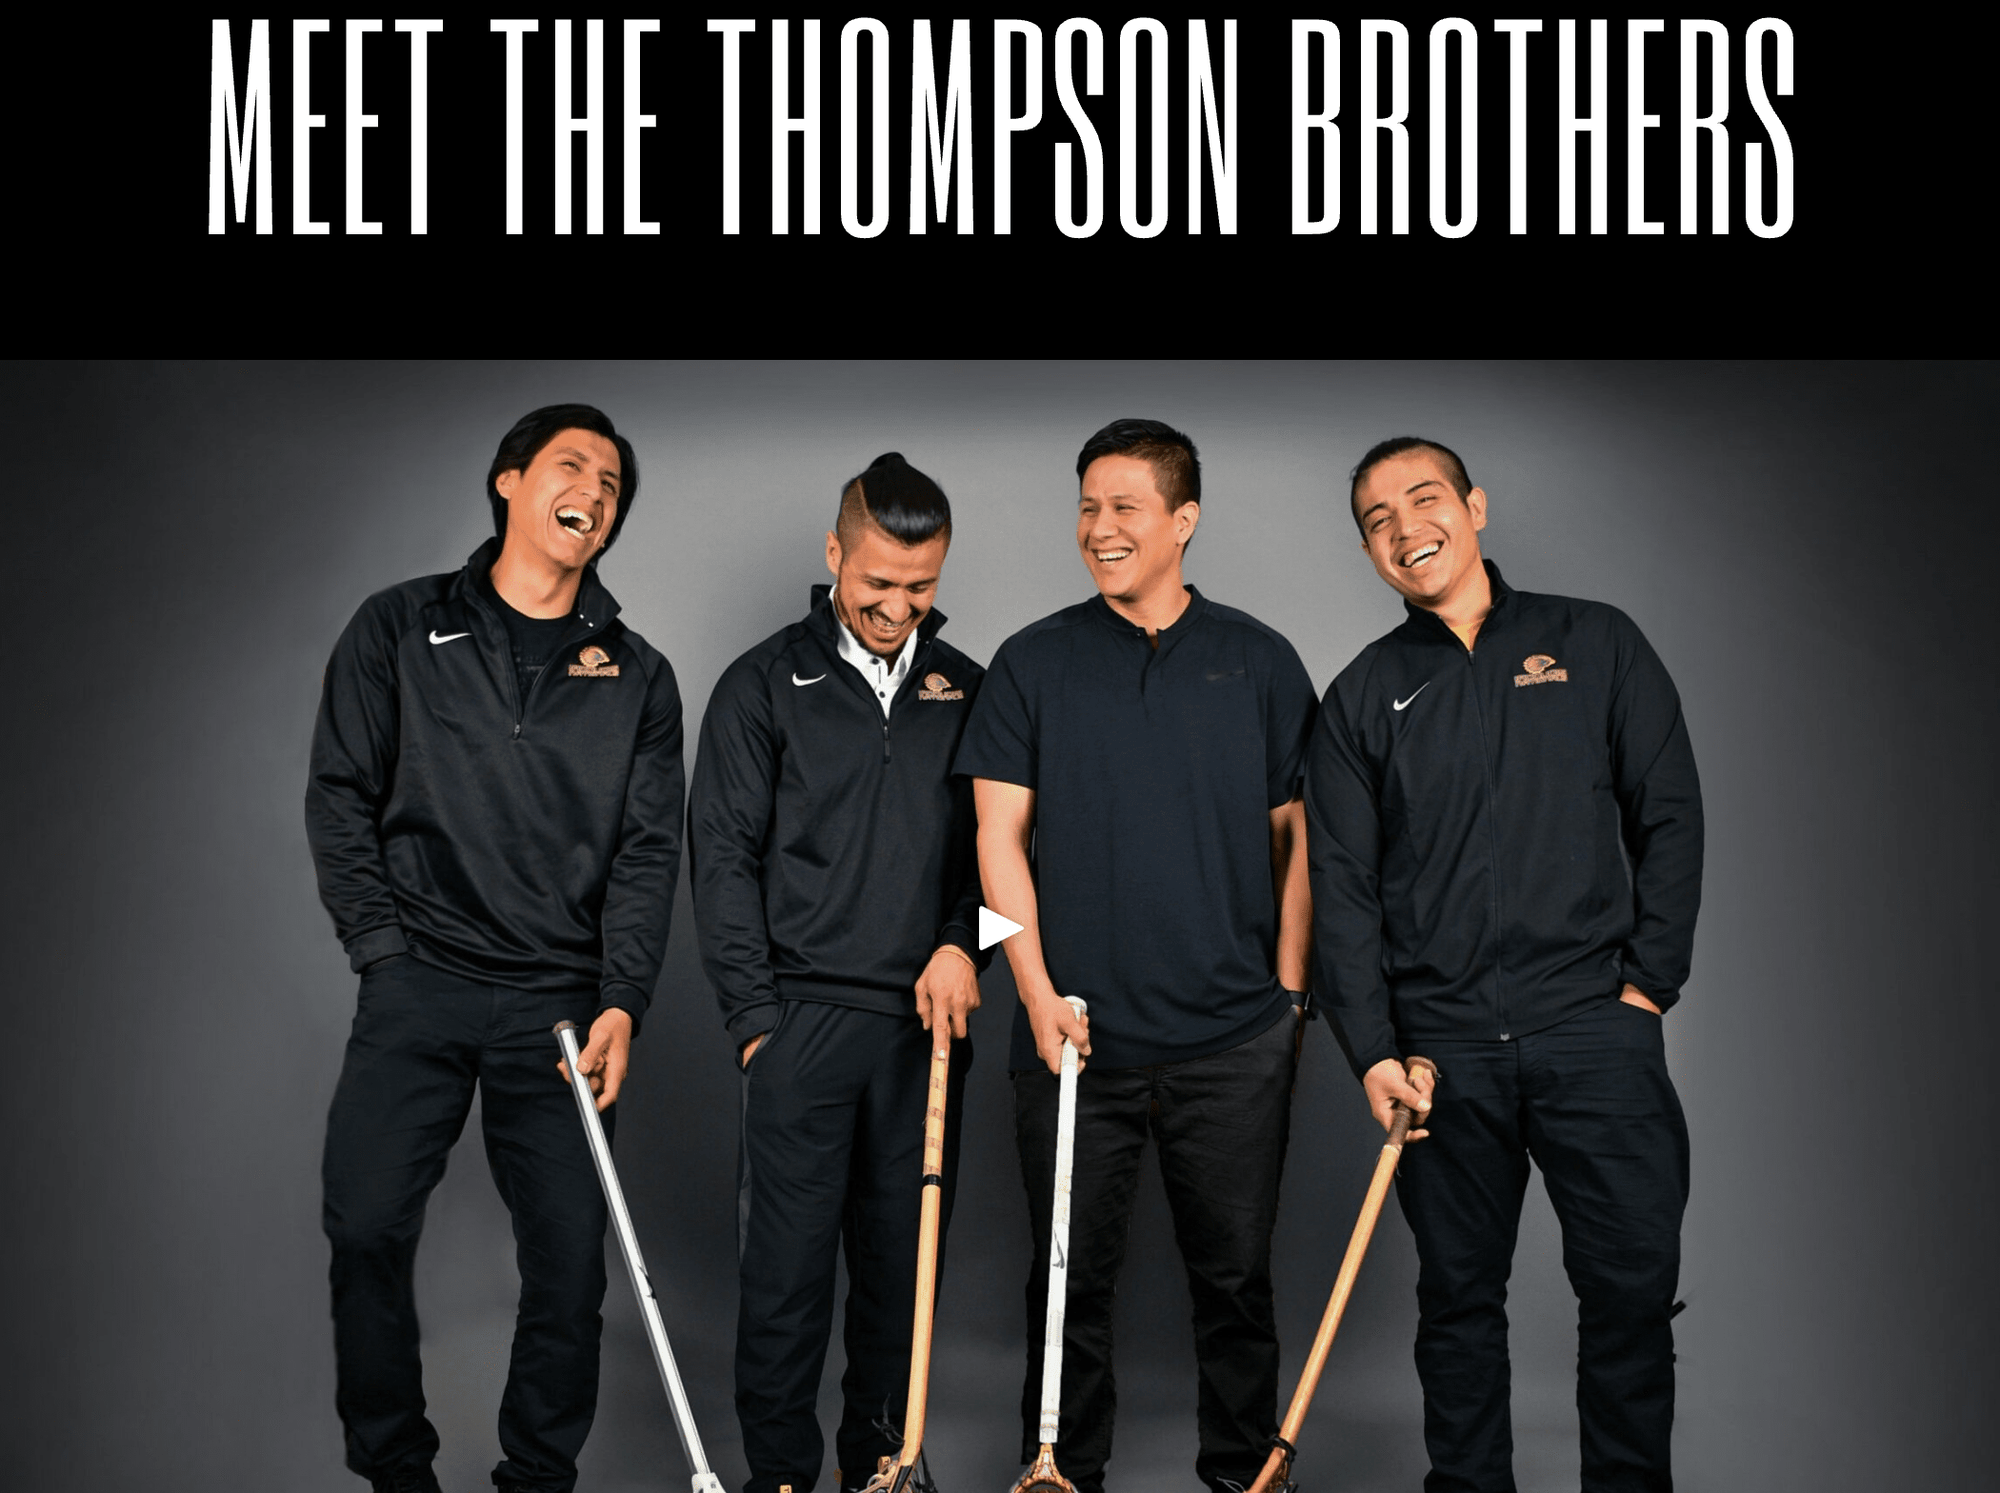 New Swarm FlingGolf to Support the Thompson Brothers Foundation